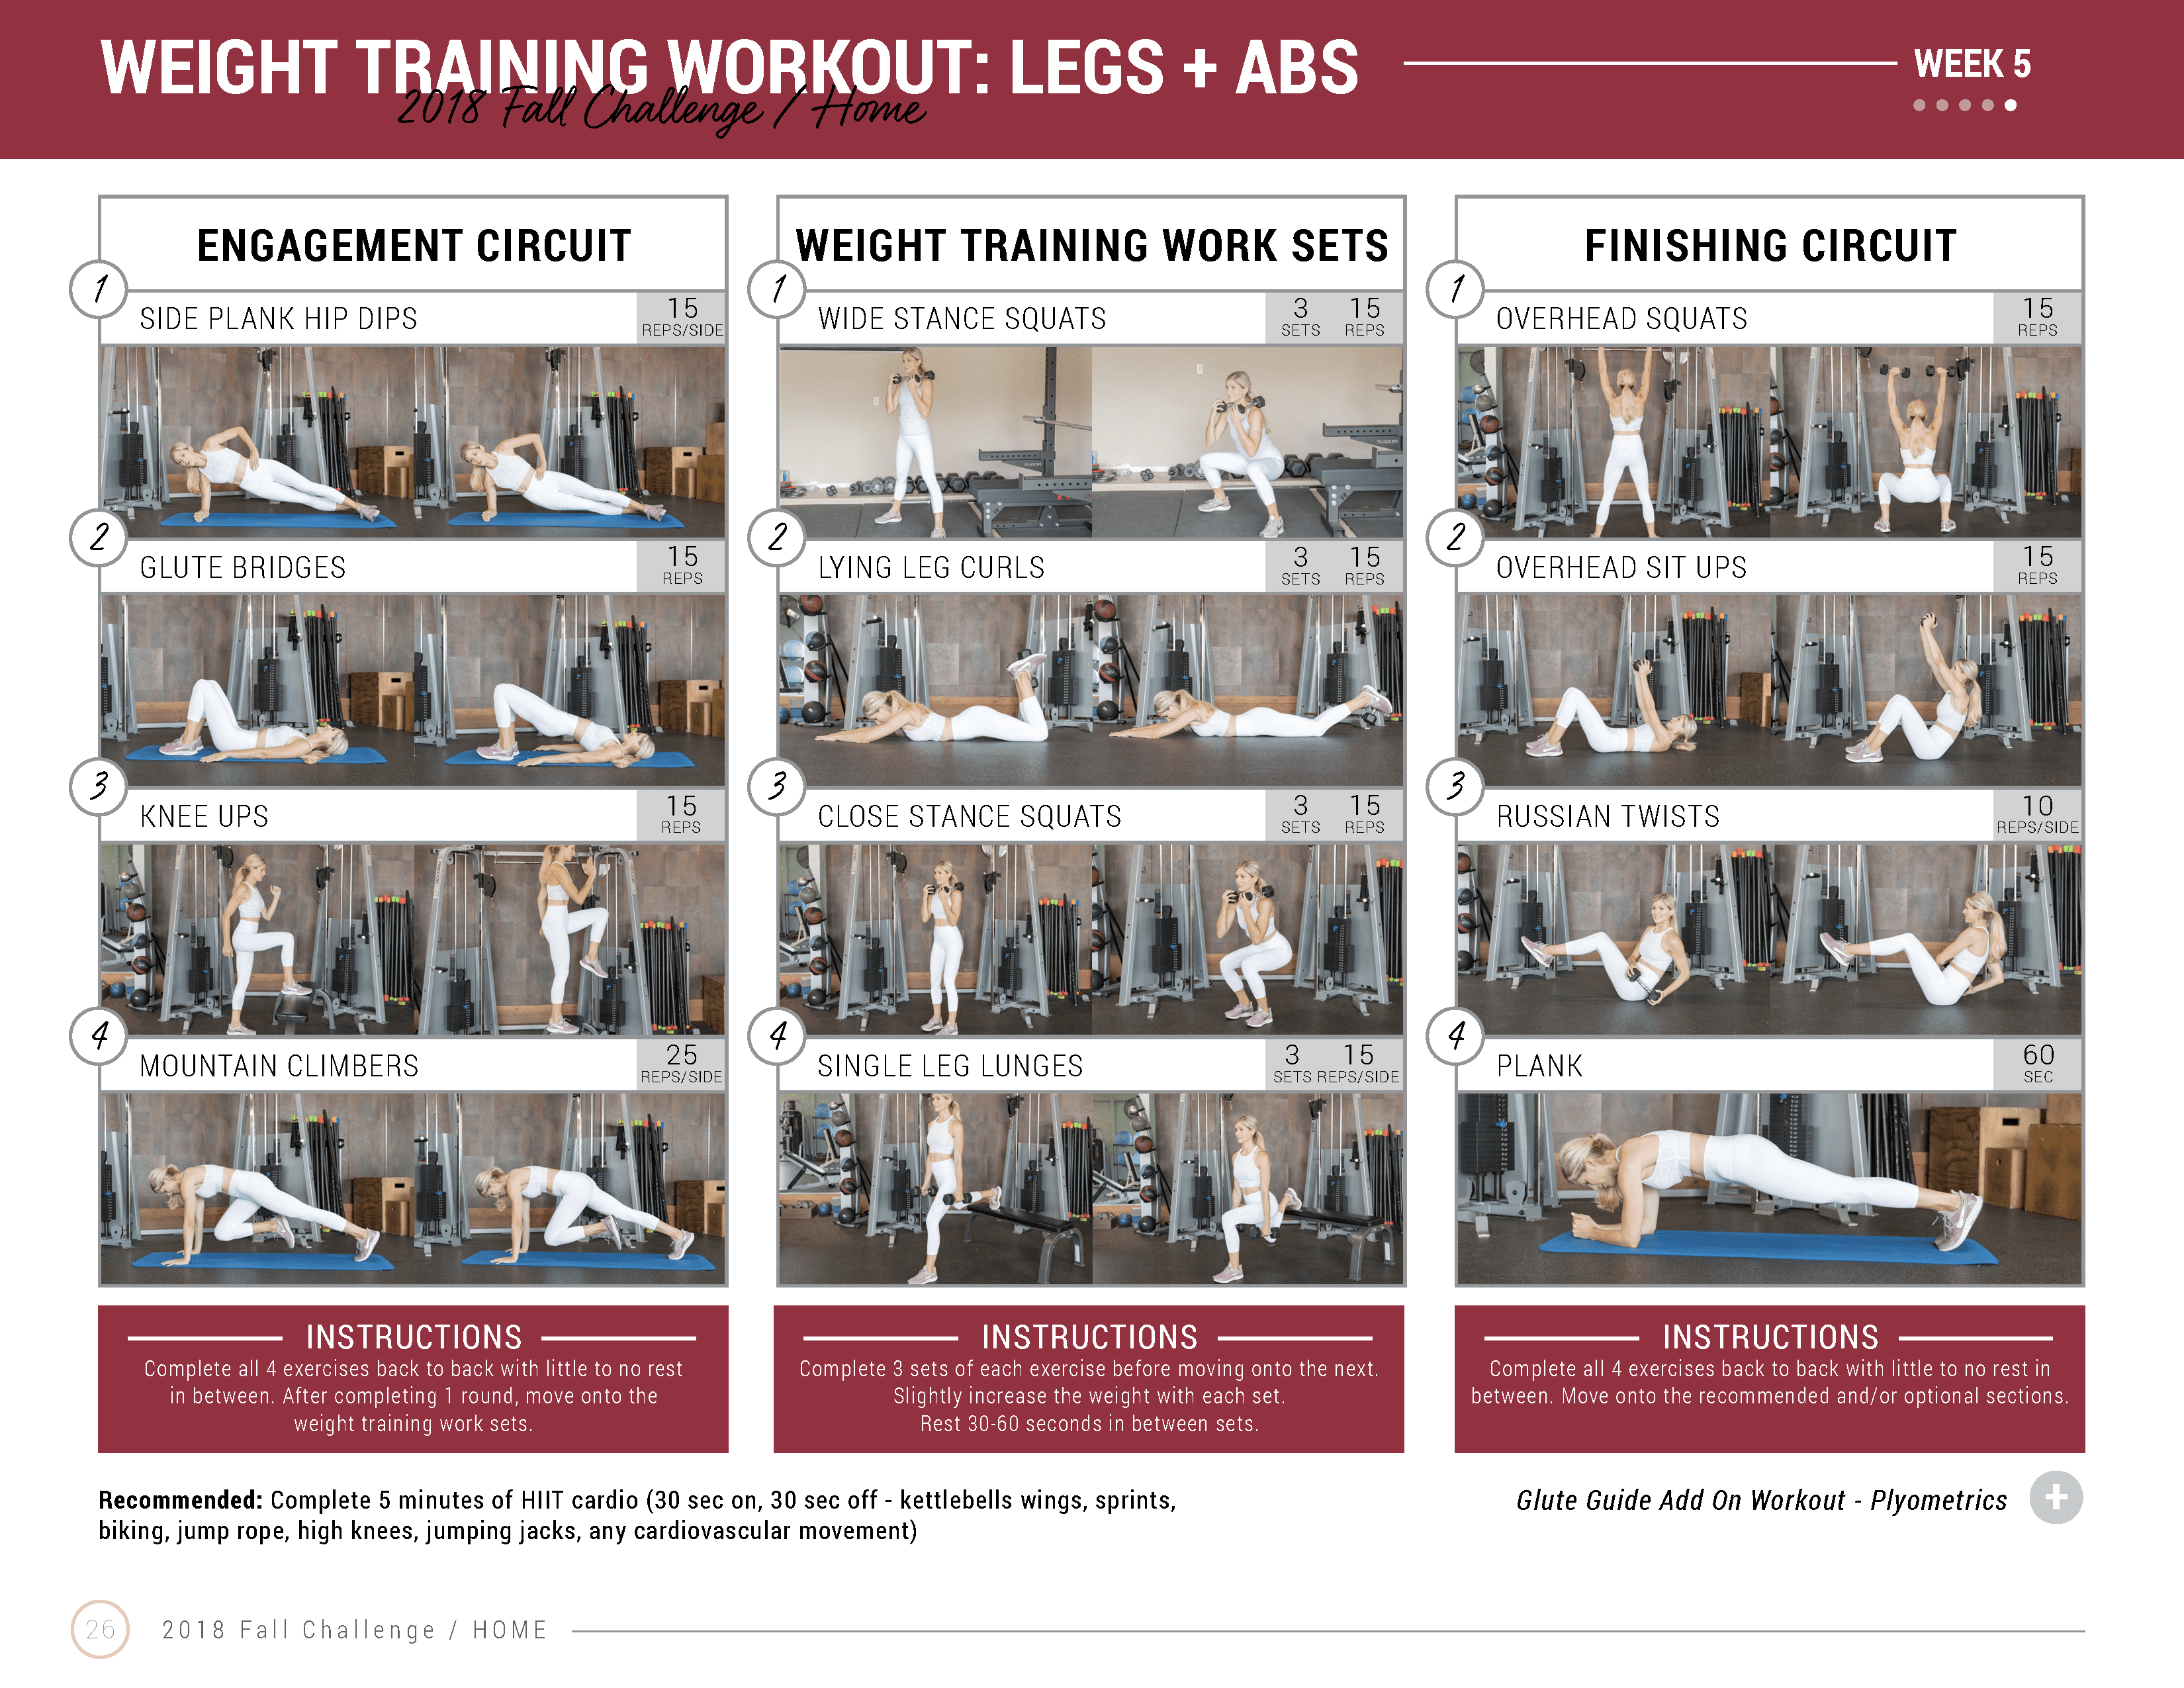 legs and abs at home workout